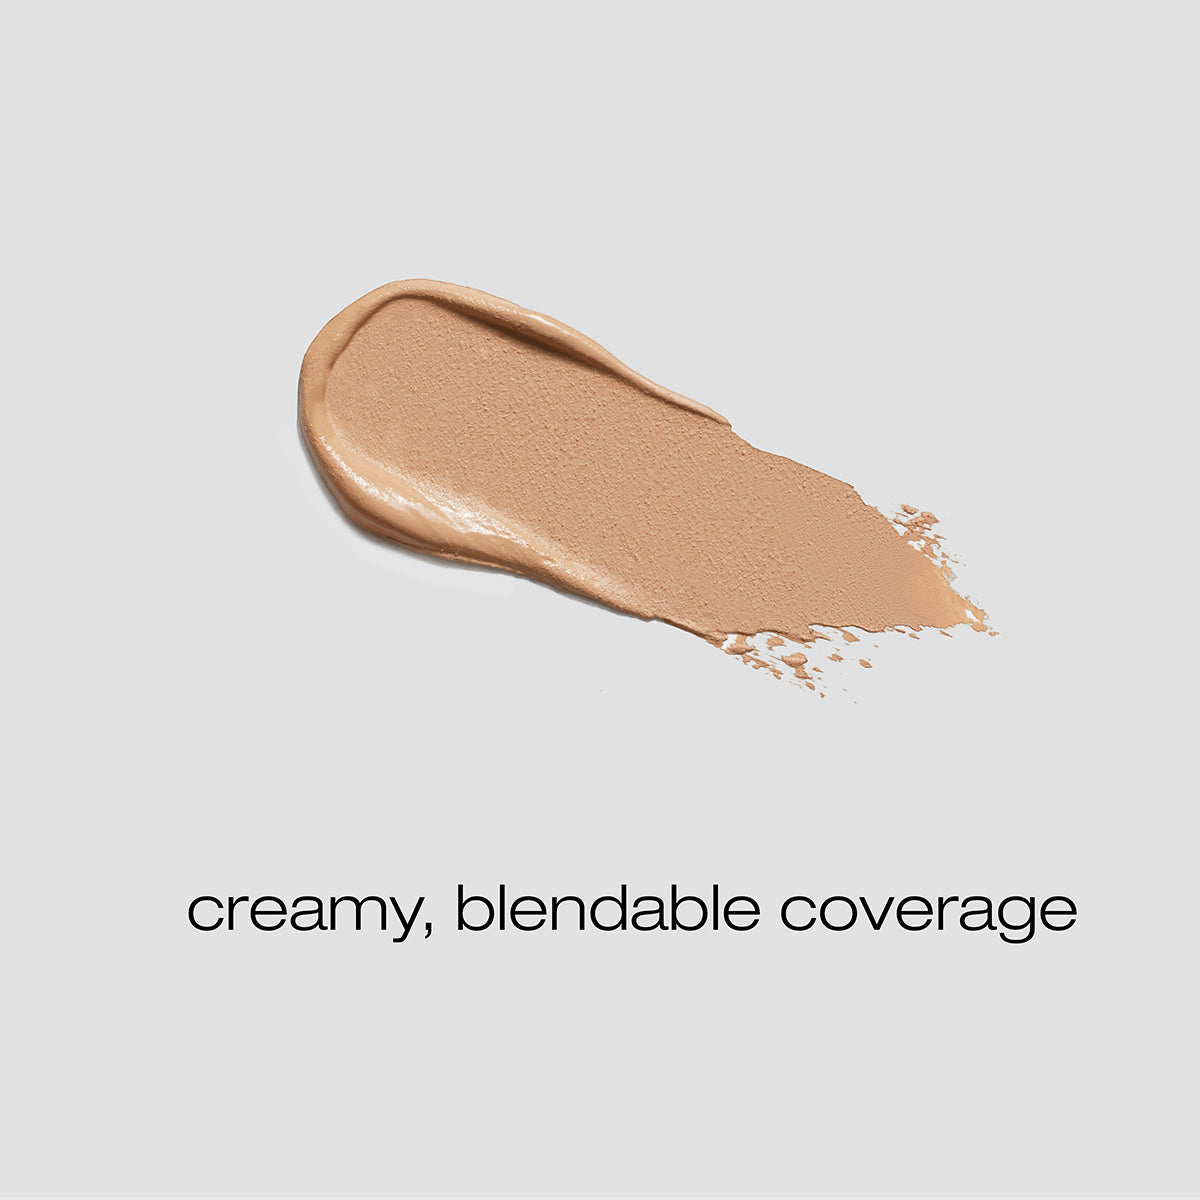 Spread of the Irish Cream concealer with description of creamy, blendable coverage